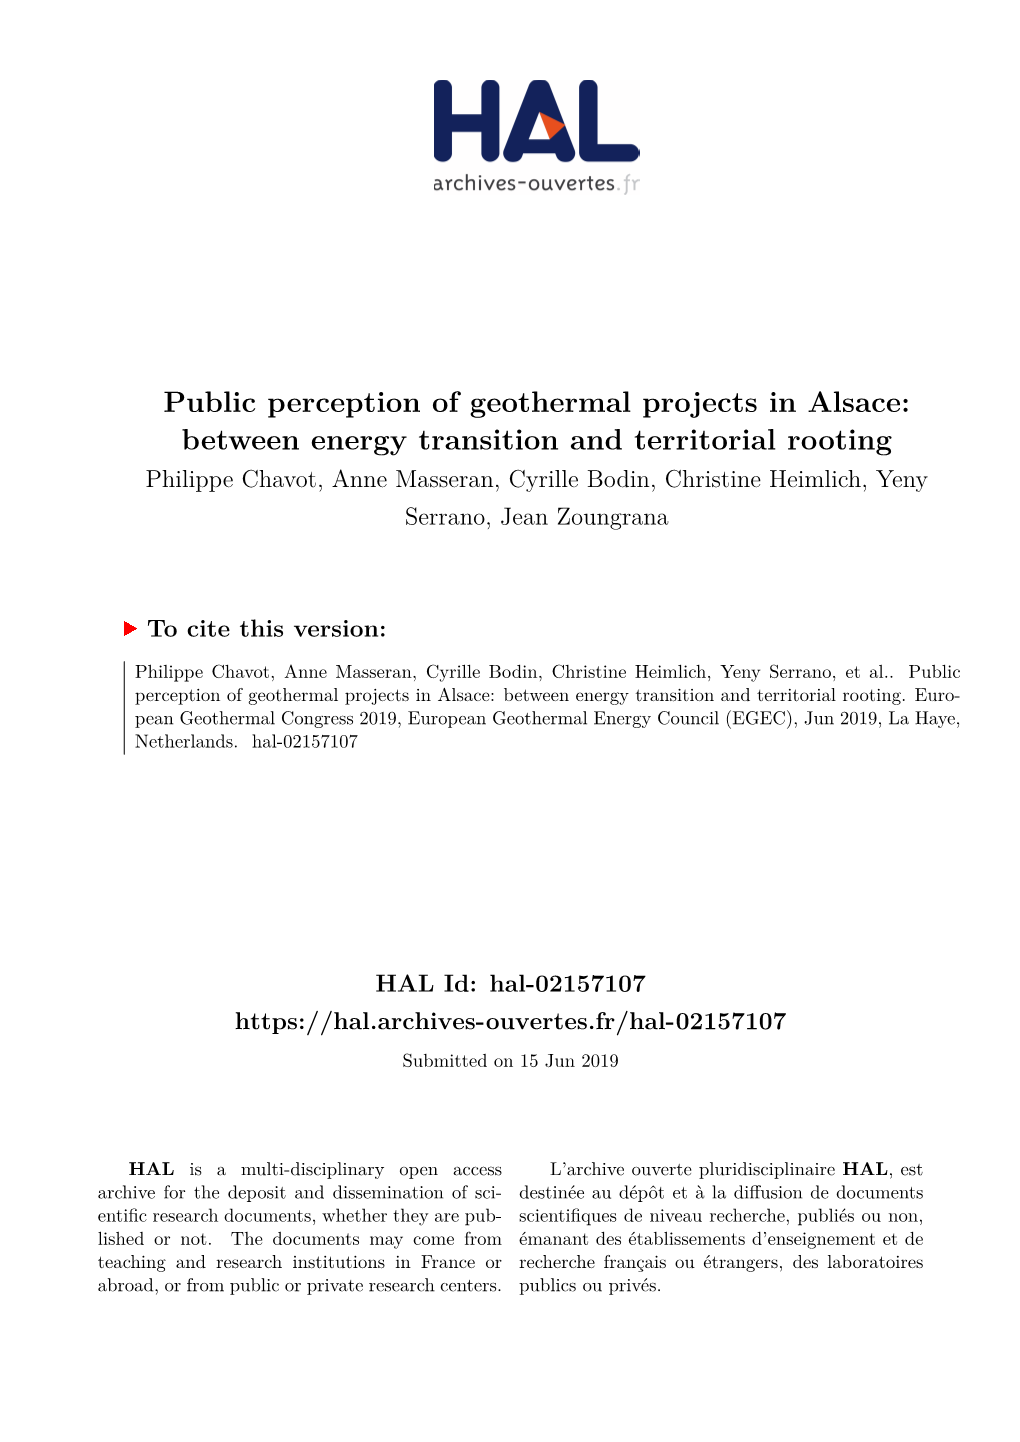 Public Perception of Geothermal Projects in Alsace: Between Energy